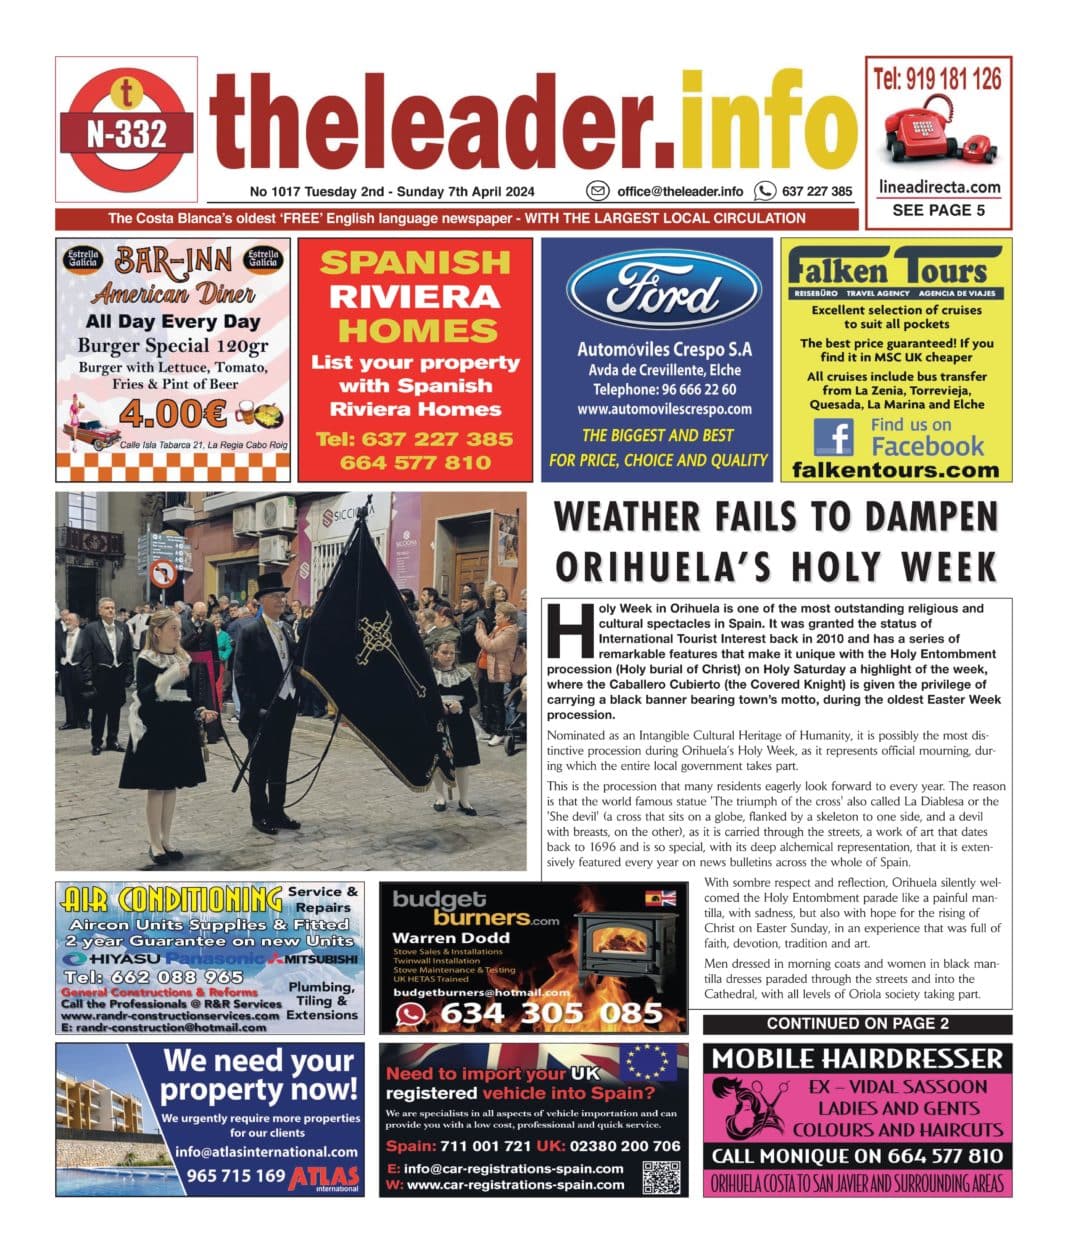 The Leader Newspaper 02 April 24 – Edition 1017